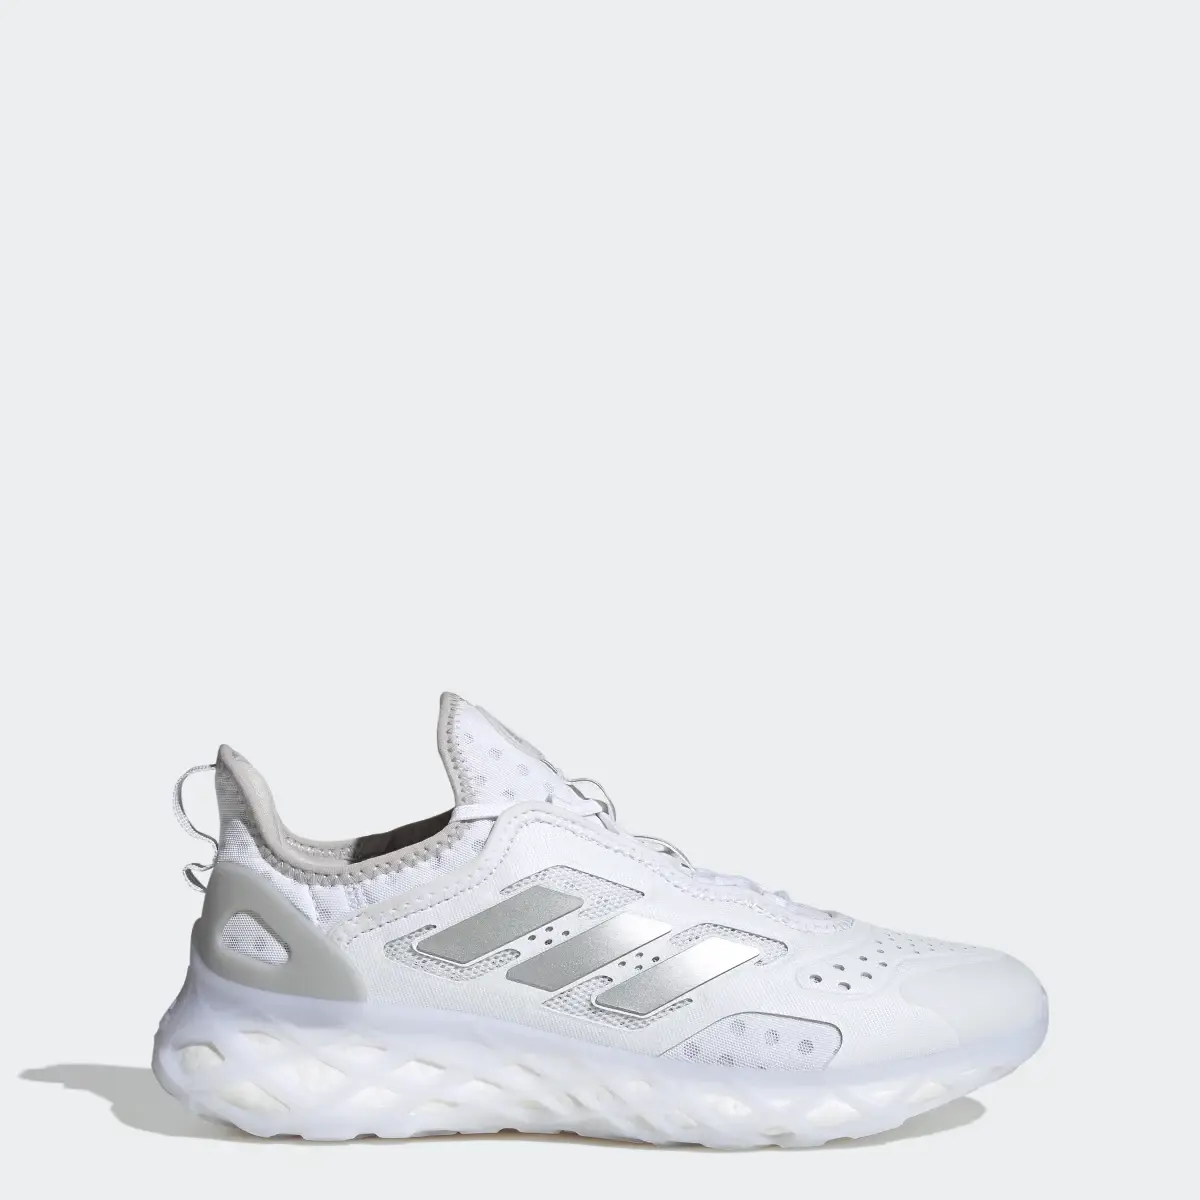 Adidas Web Boost Shoes. 1